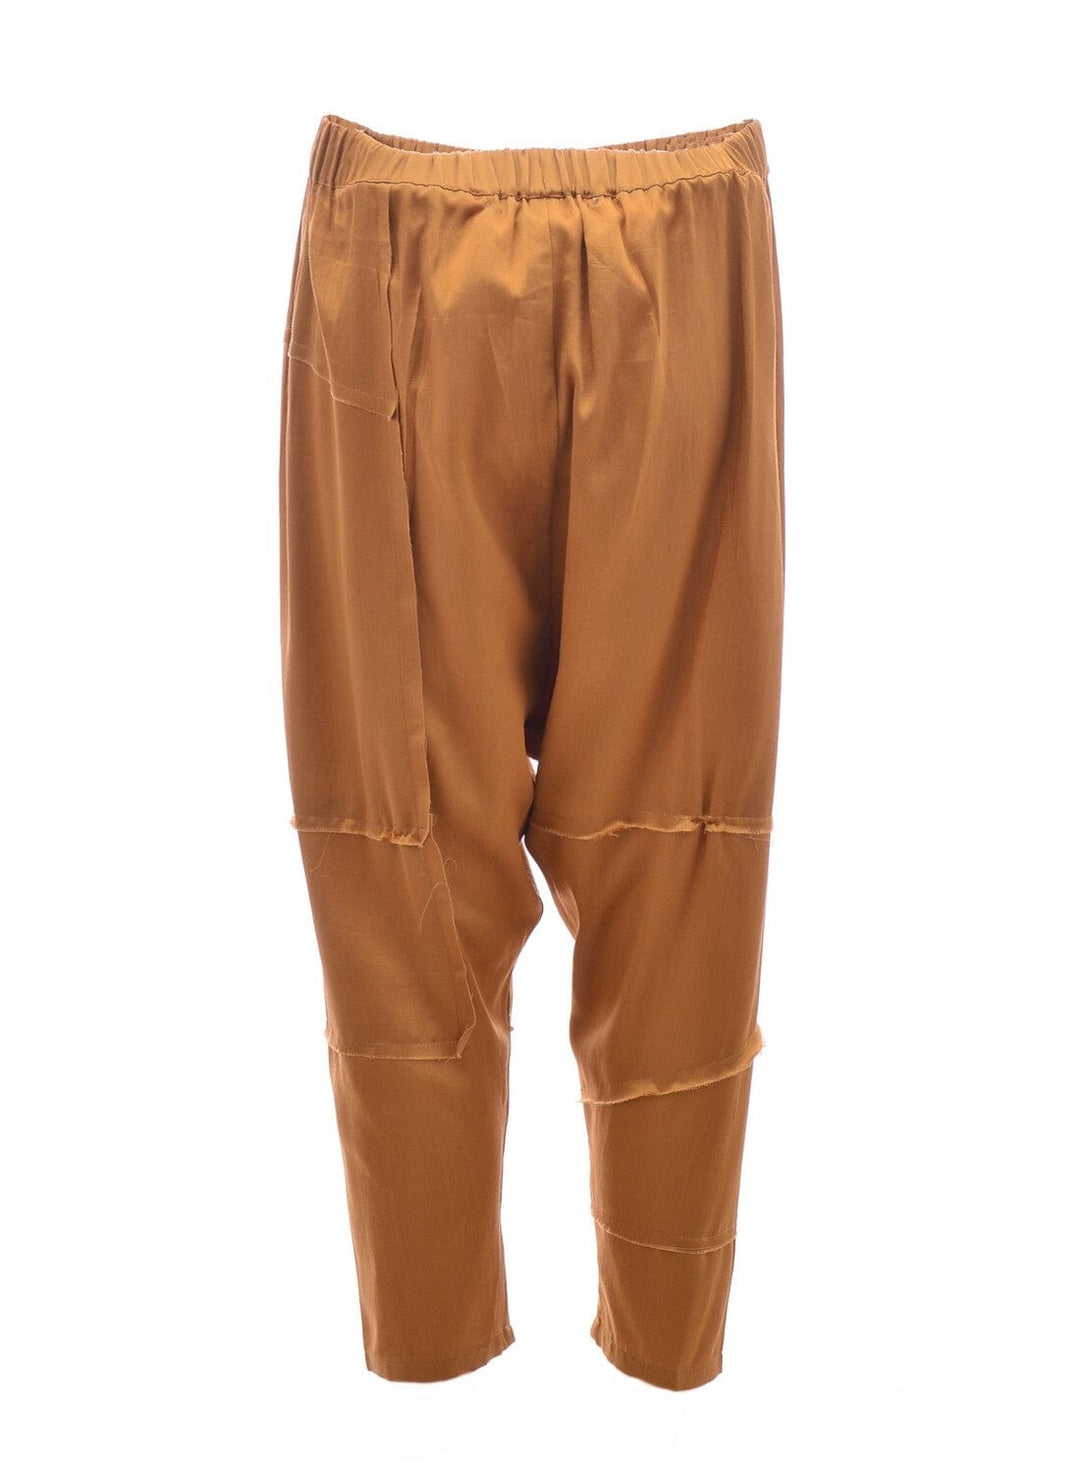 Jaipur Silk Hemp Cargo Pants in Coco Gold Trousers YBDFinds 